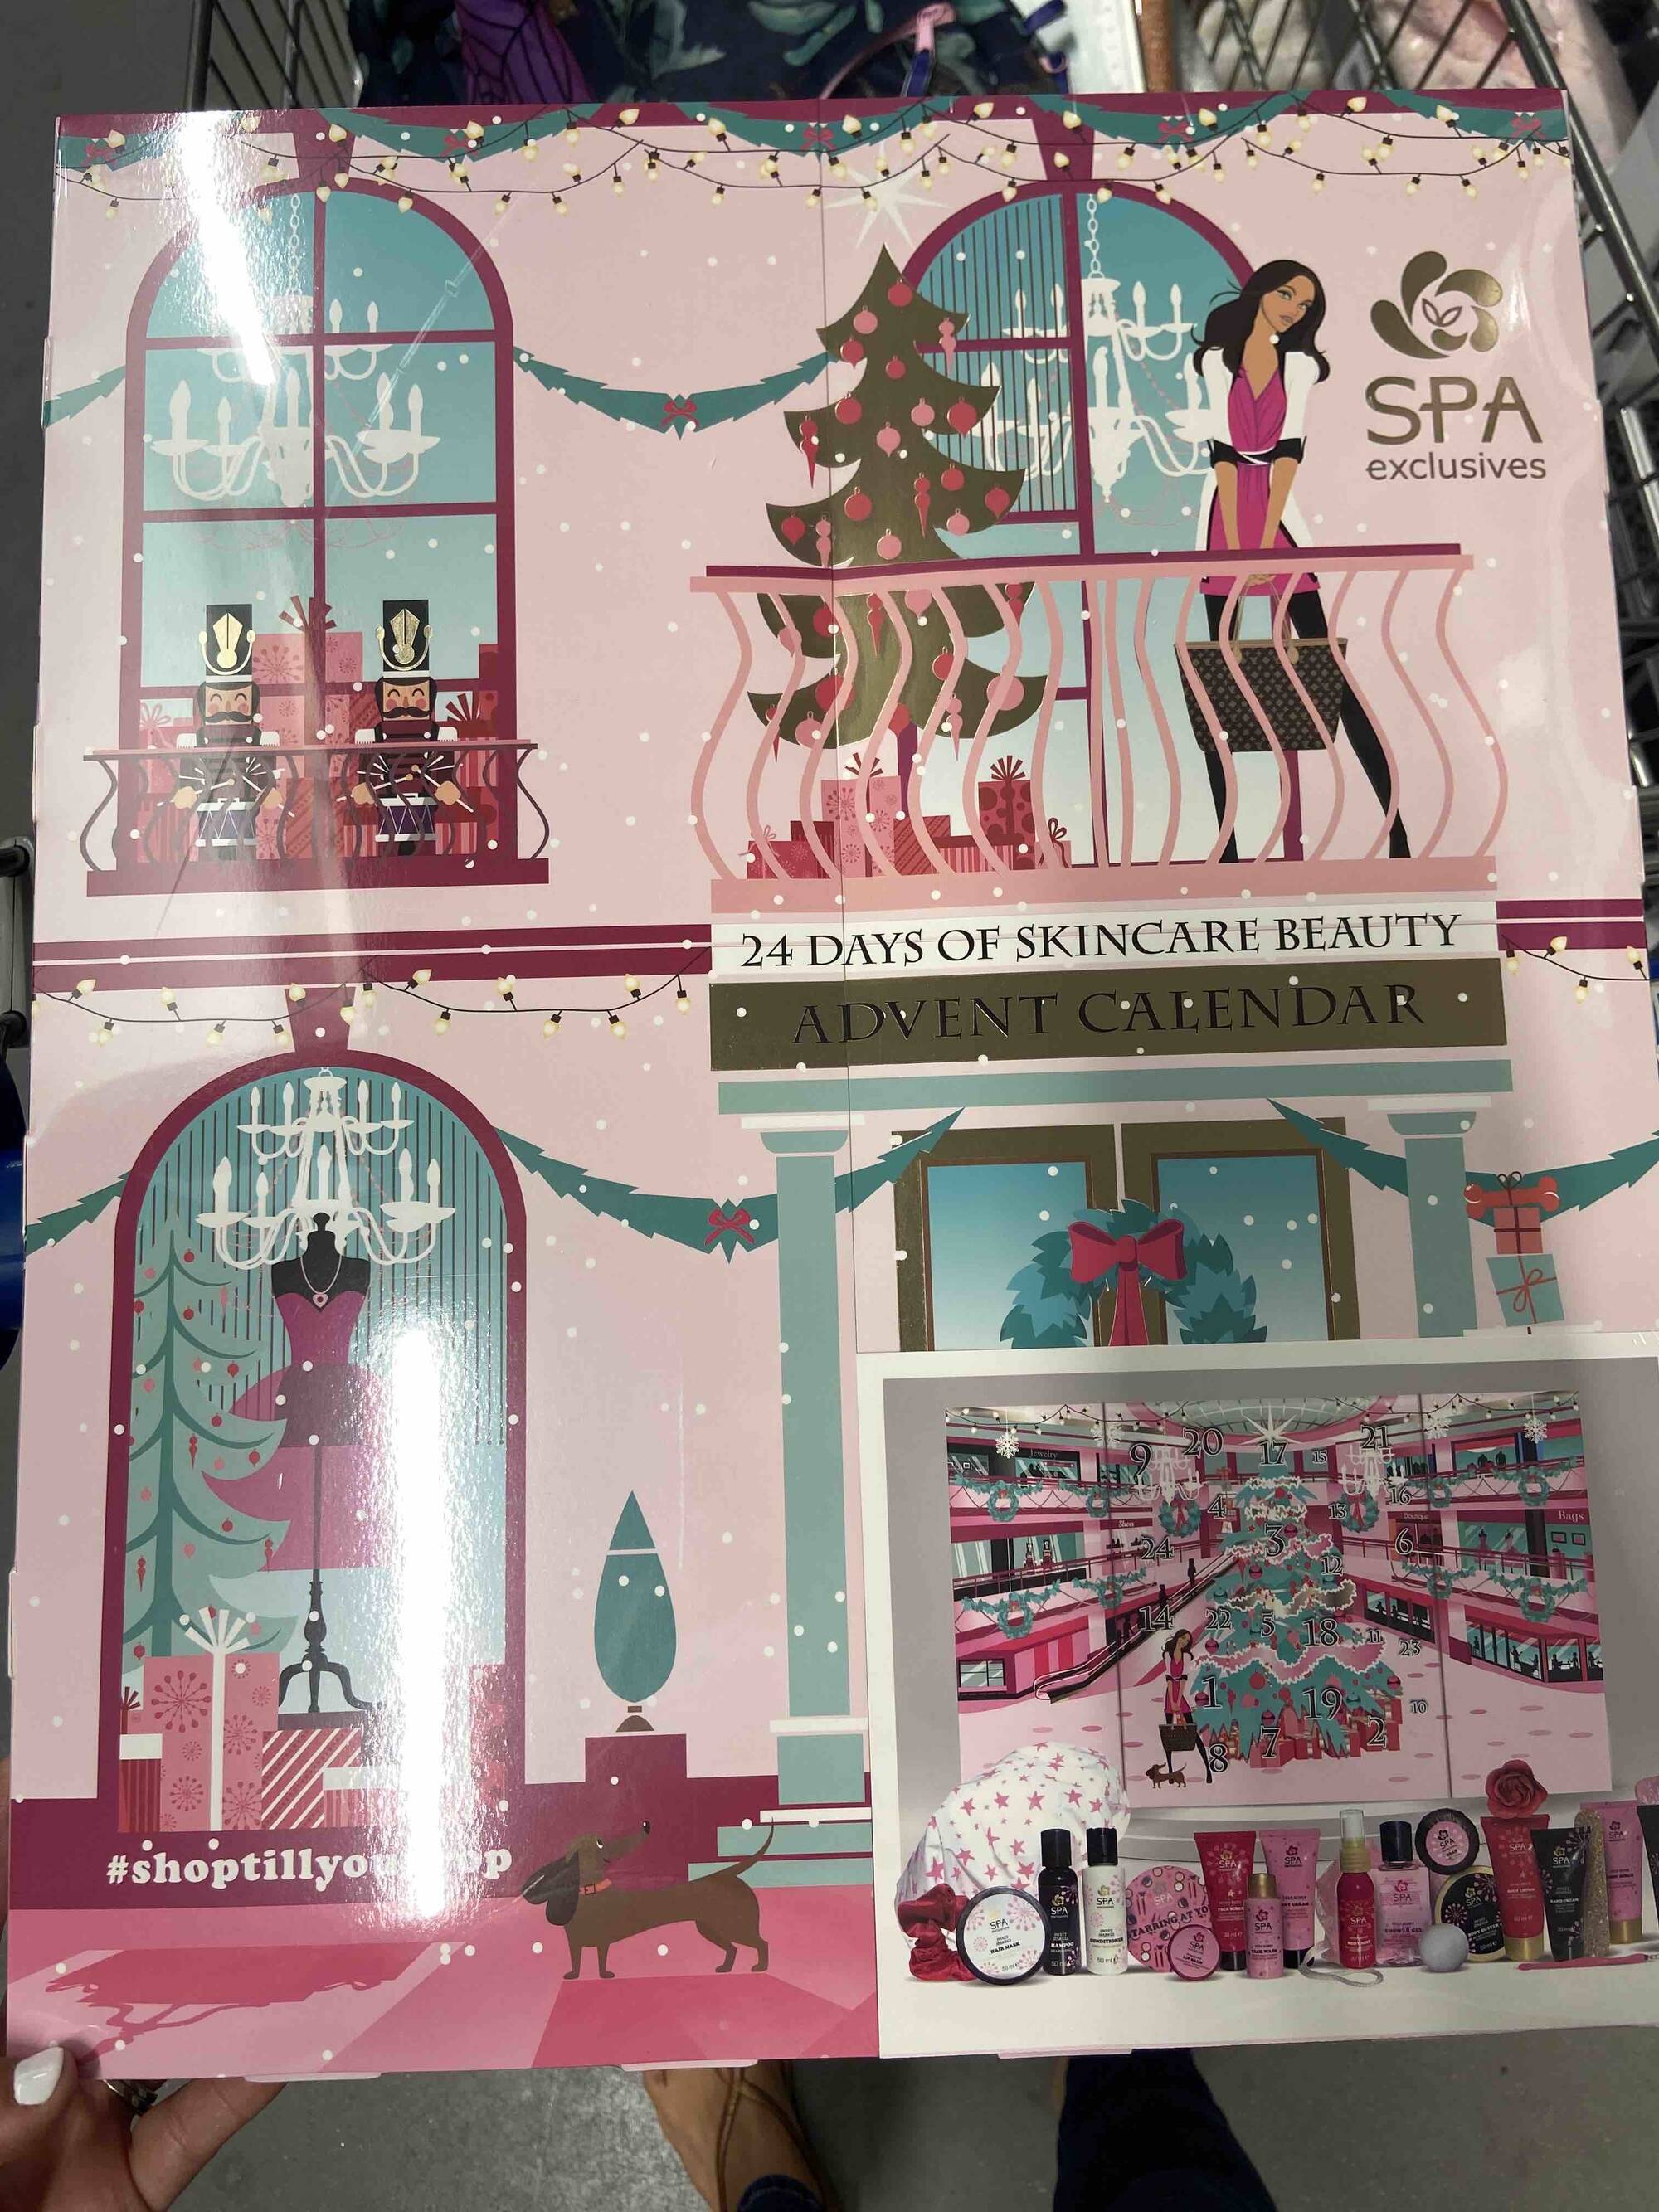 SPA EXCLUSIVES - Advent calendar - 24 days of skincare beauty